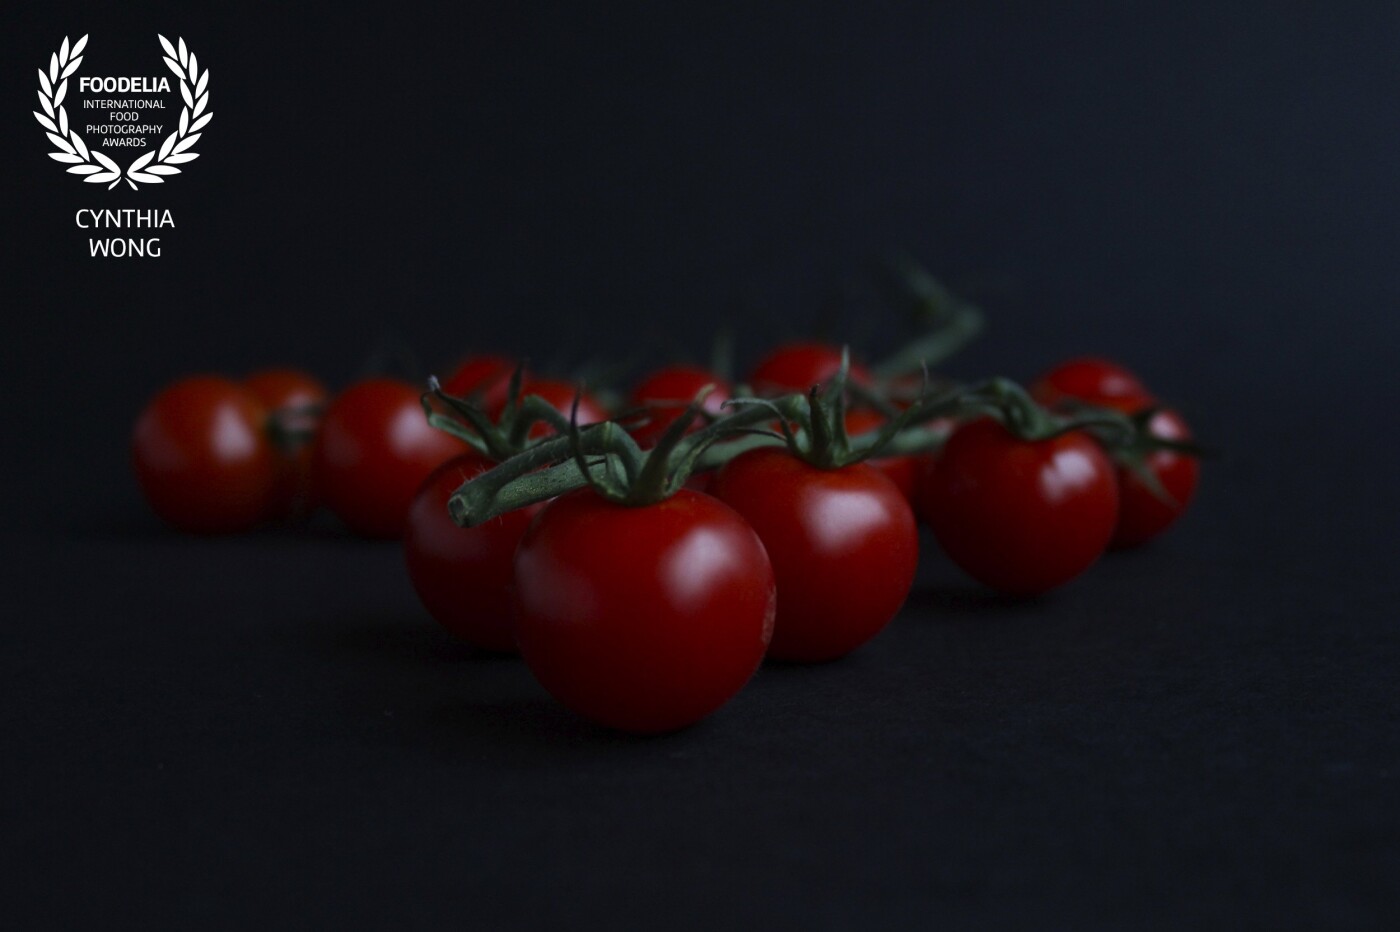 This is vine tomatoes taken in a dark/moody setting which I've been practicing a lot lately. Since the Food Photography & Styling course I did recently, I'm loving this style of photography more and more.